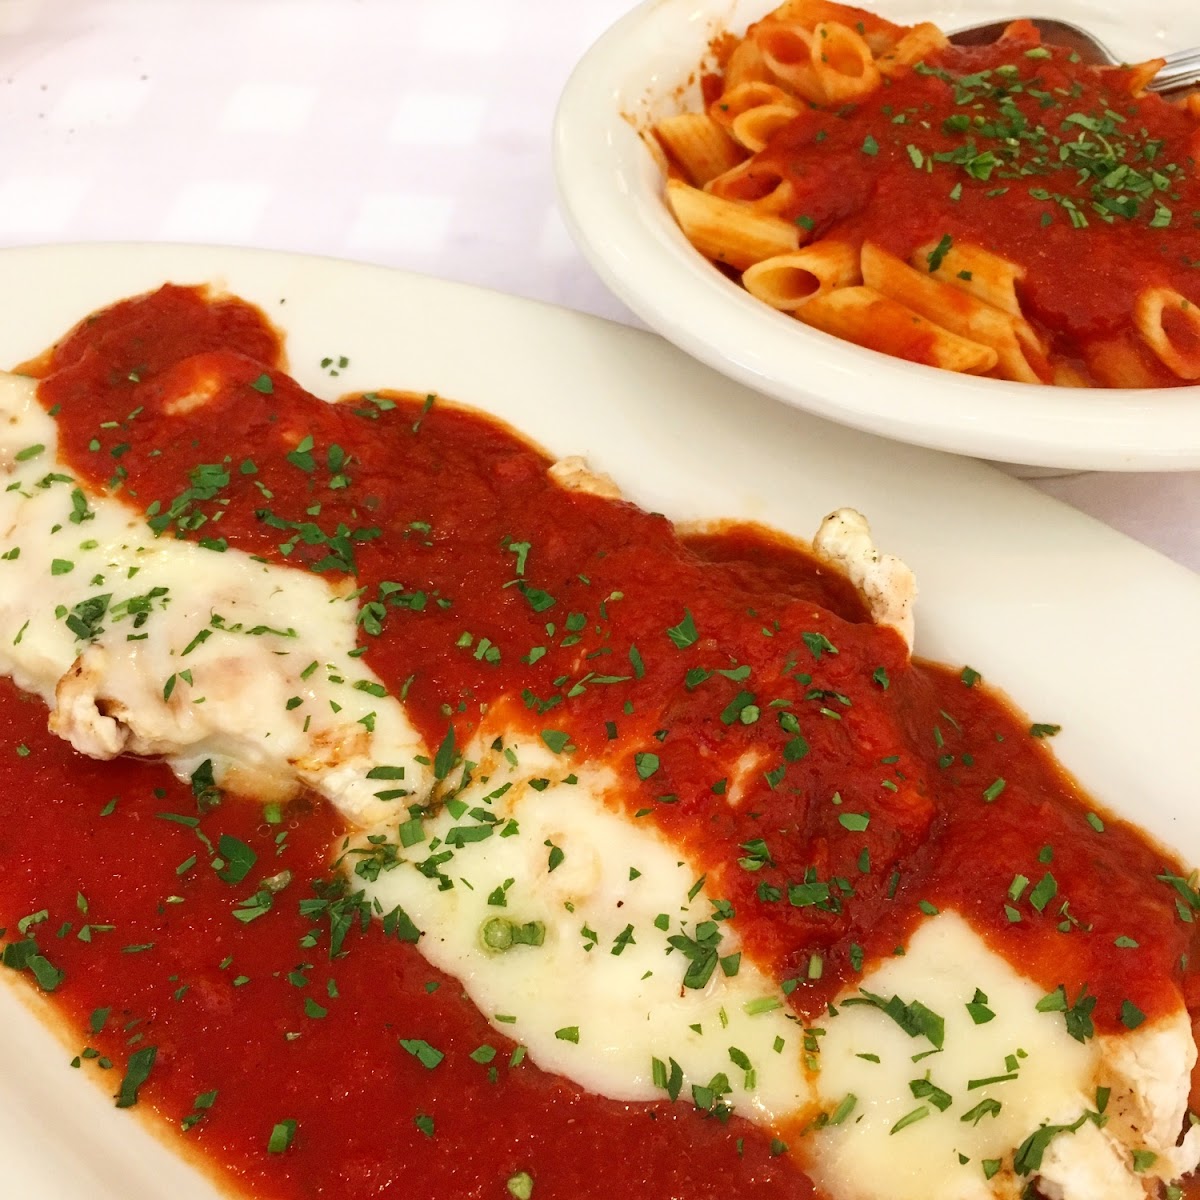 Chicken Parmesan and gf pasta with tomato sauce.